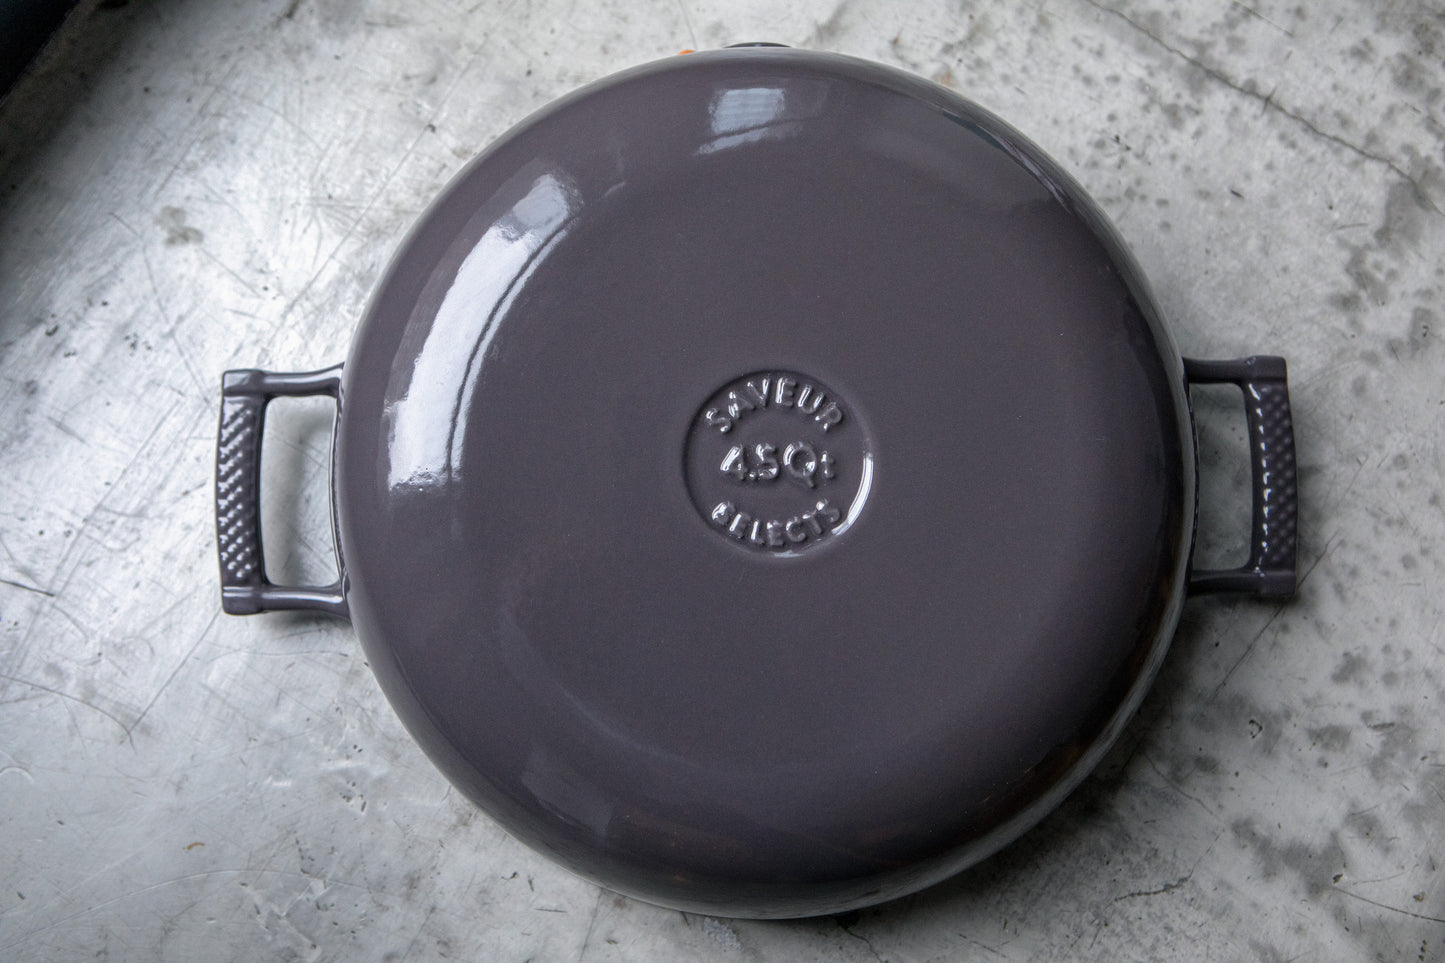 4.5-Quart Enameled Coated Oval Braiser with Stainless Steel Lid